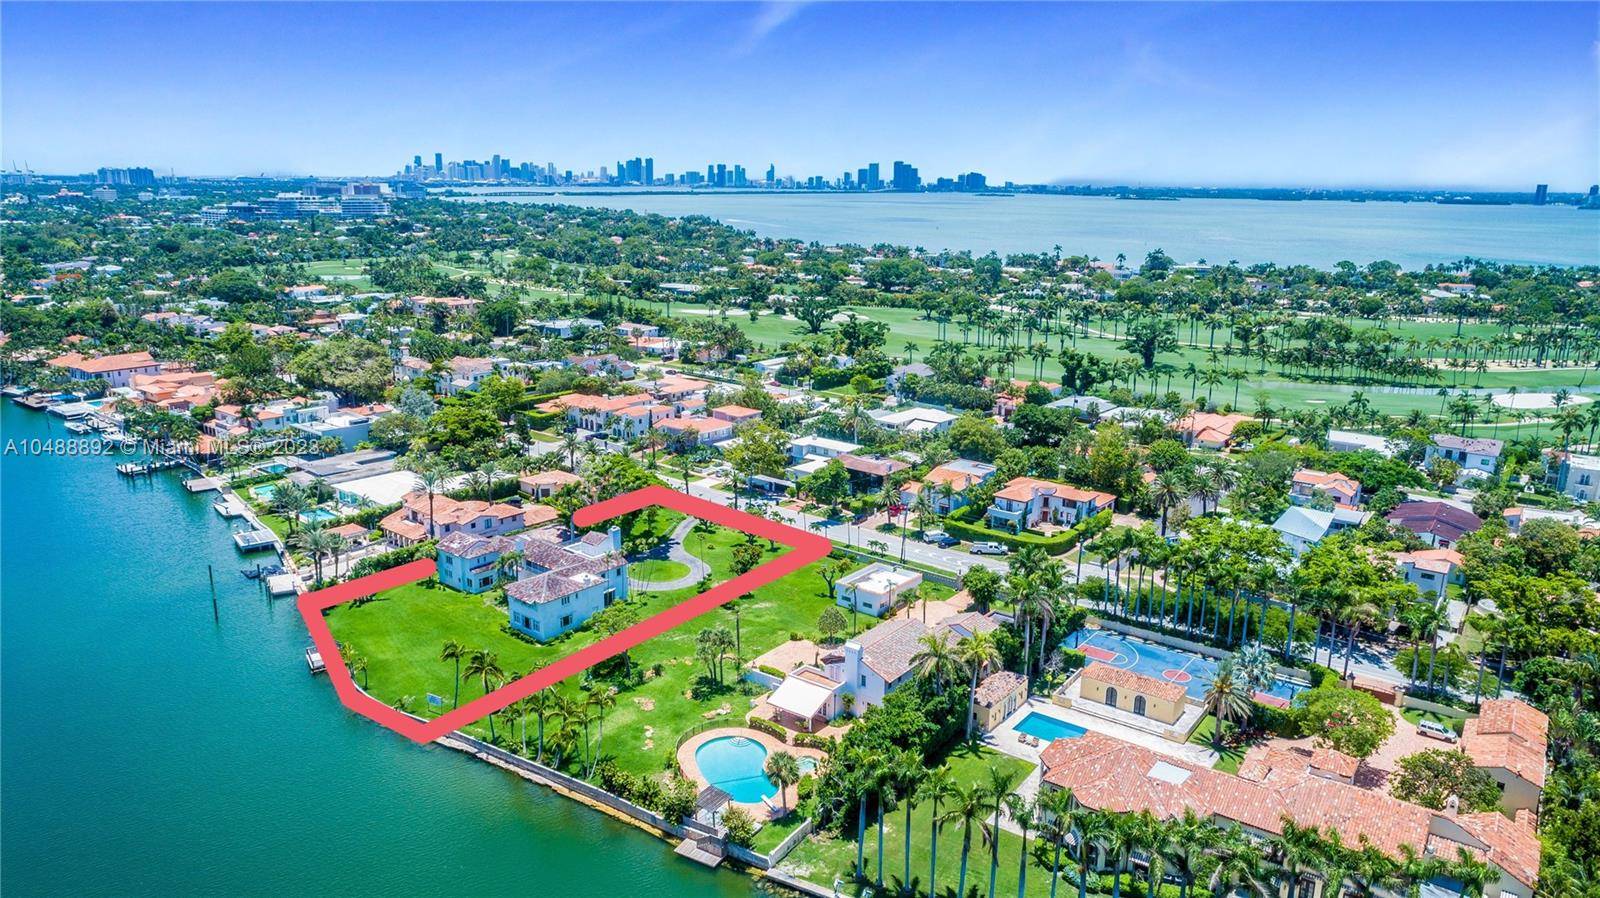 DEVELOPERS DREAM 1 ACRE MIAMI BEACH LEGACY ESTATE ON MARKET FOR SALE FOR THE 1ST TIME !